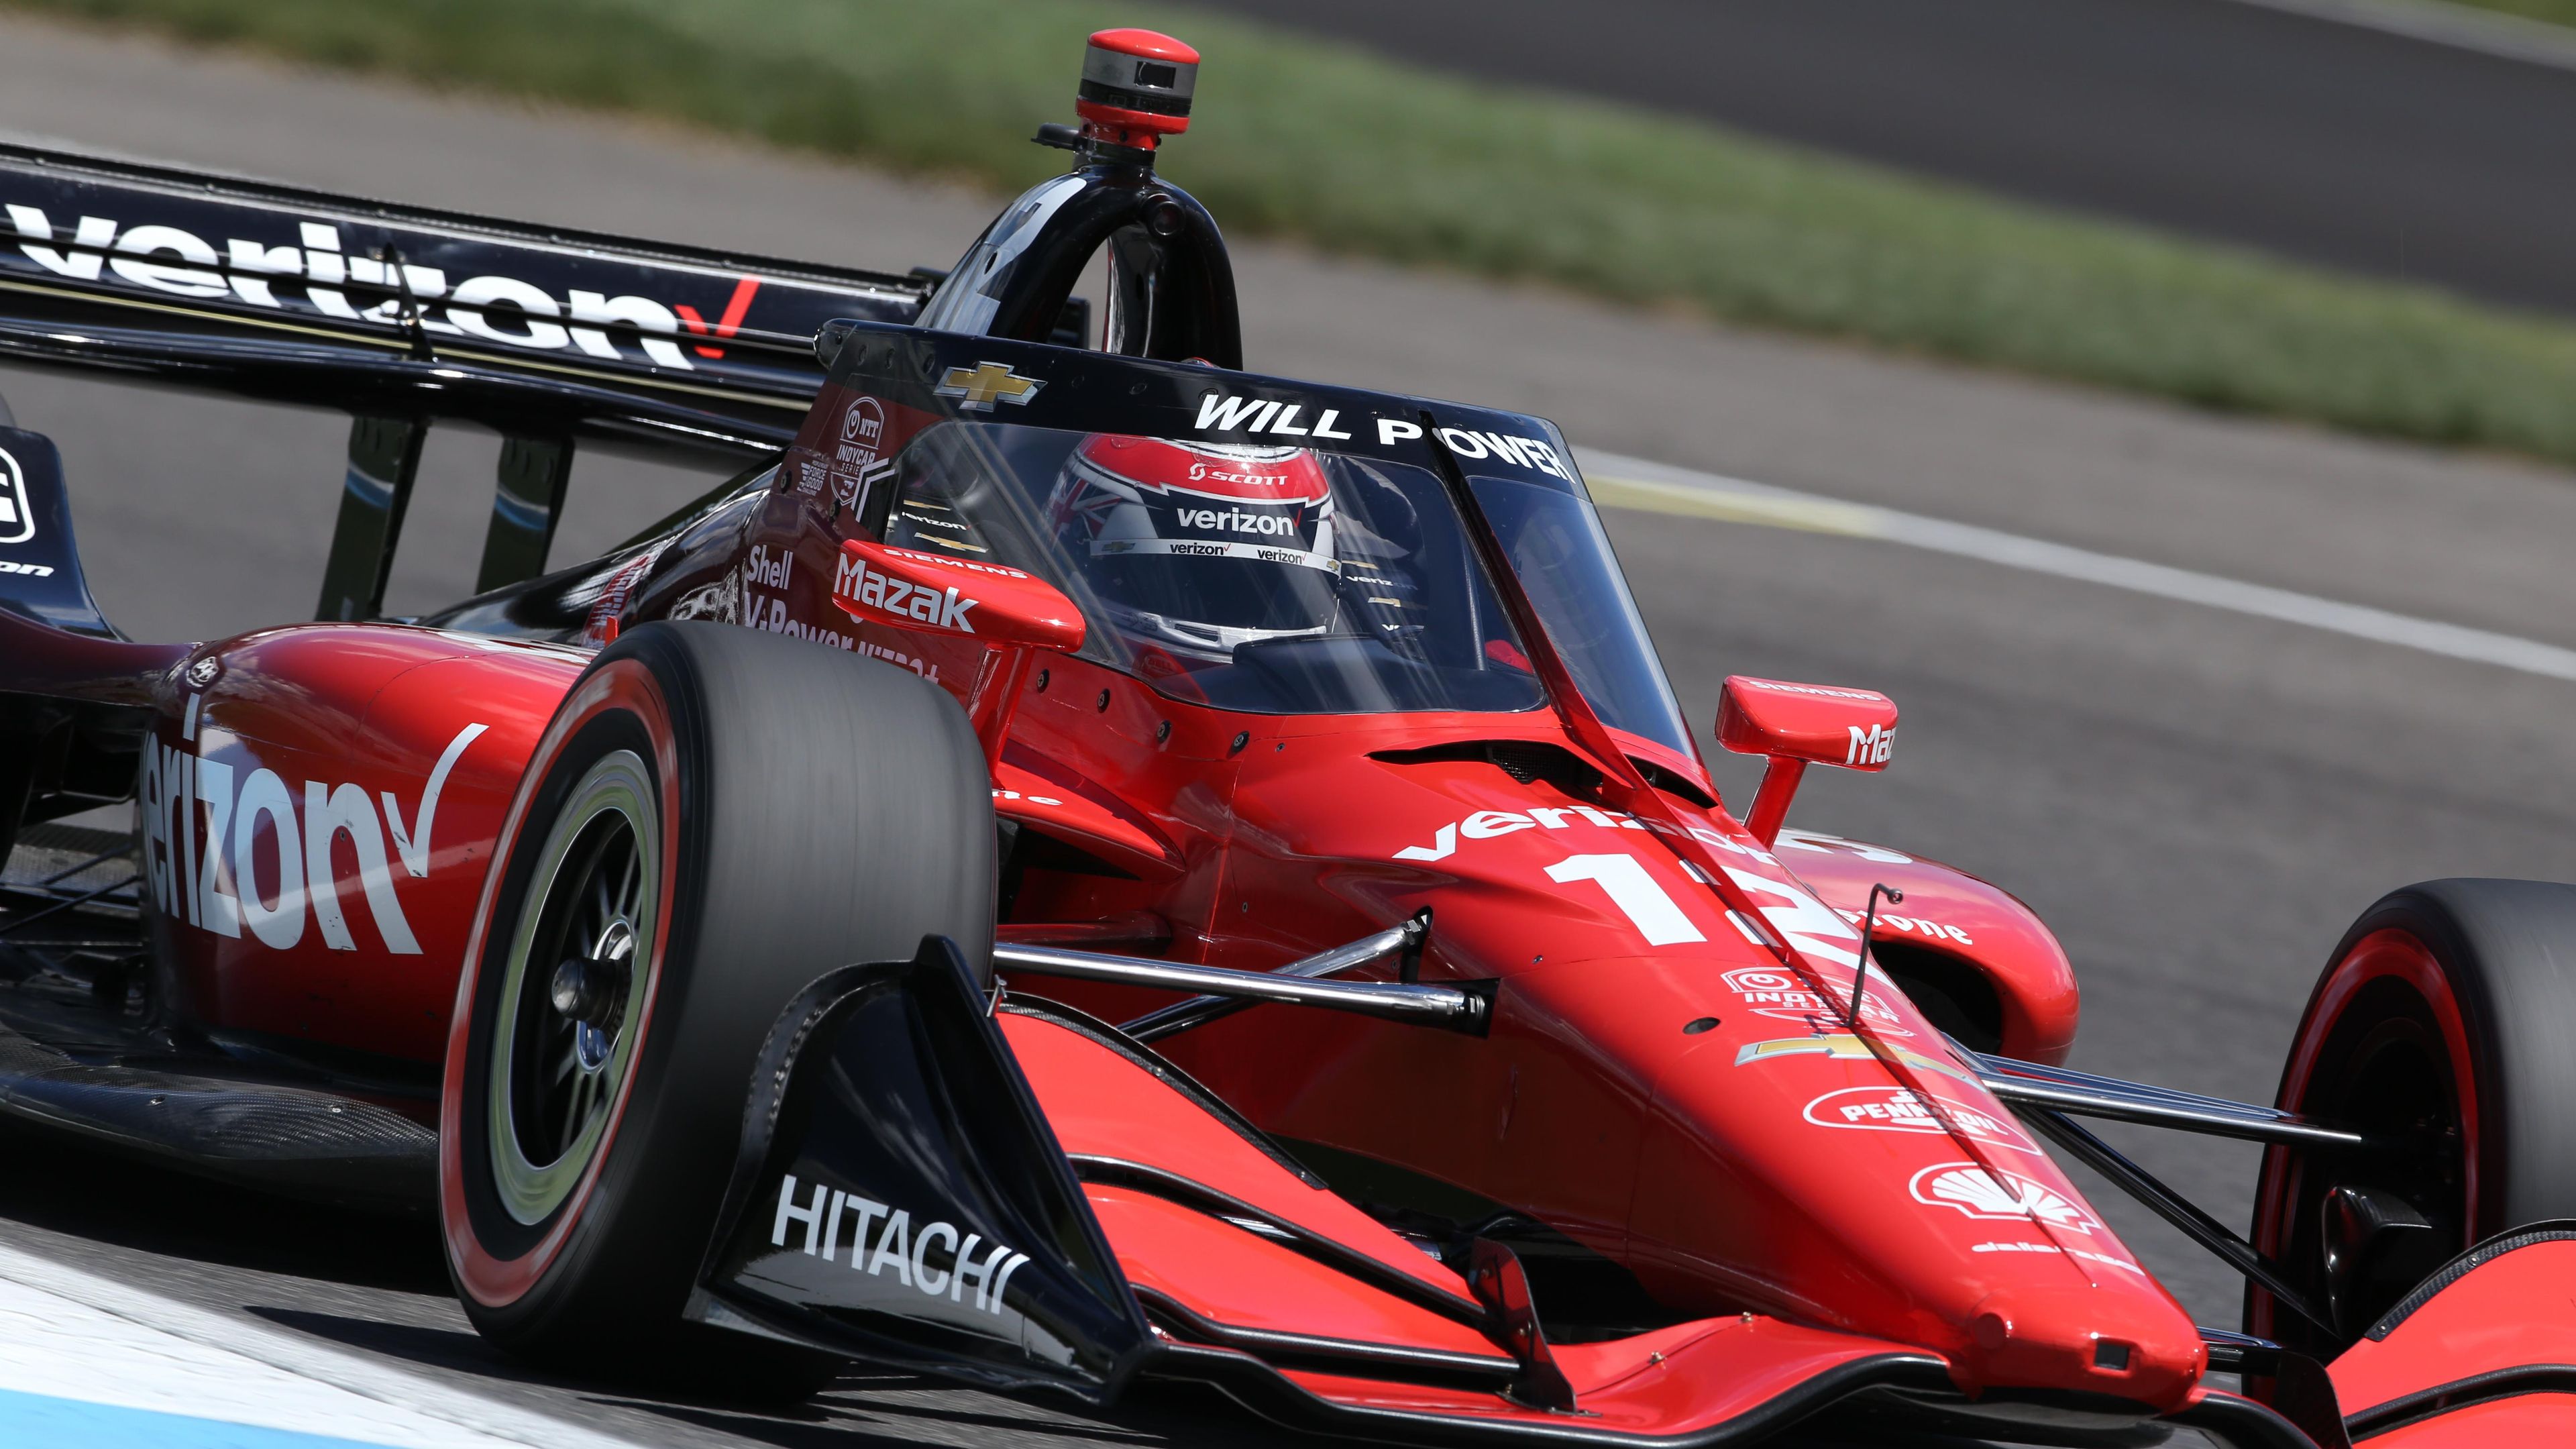 Scott Dixon says 'phenomenal' Will Power going to be hard to beat in IndyCar title race